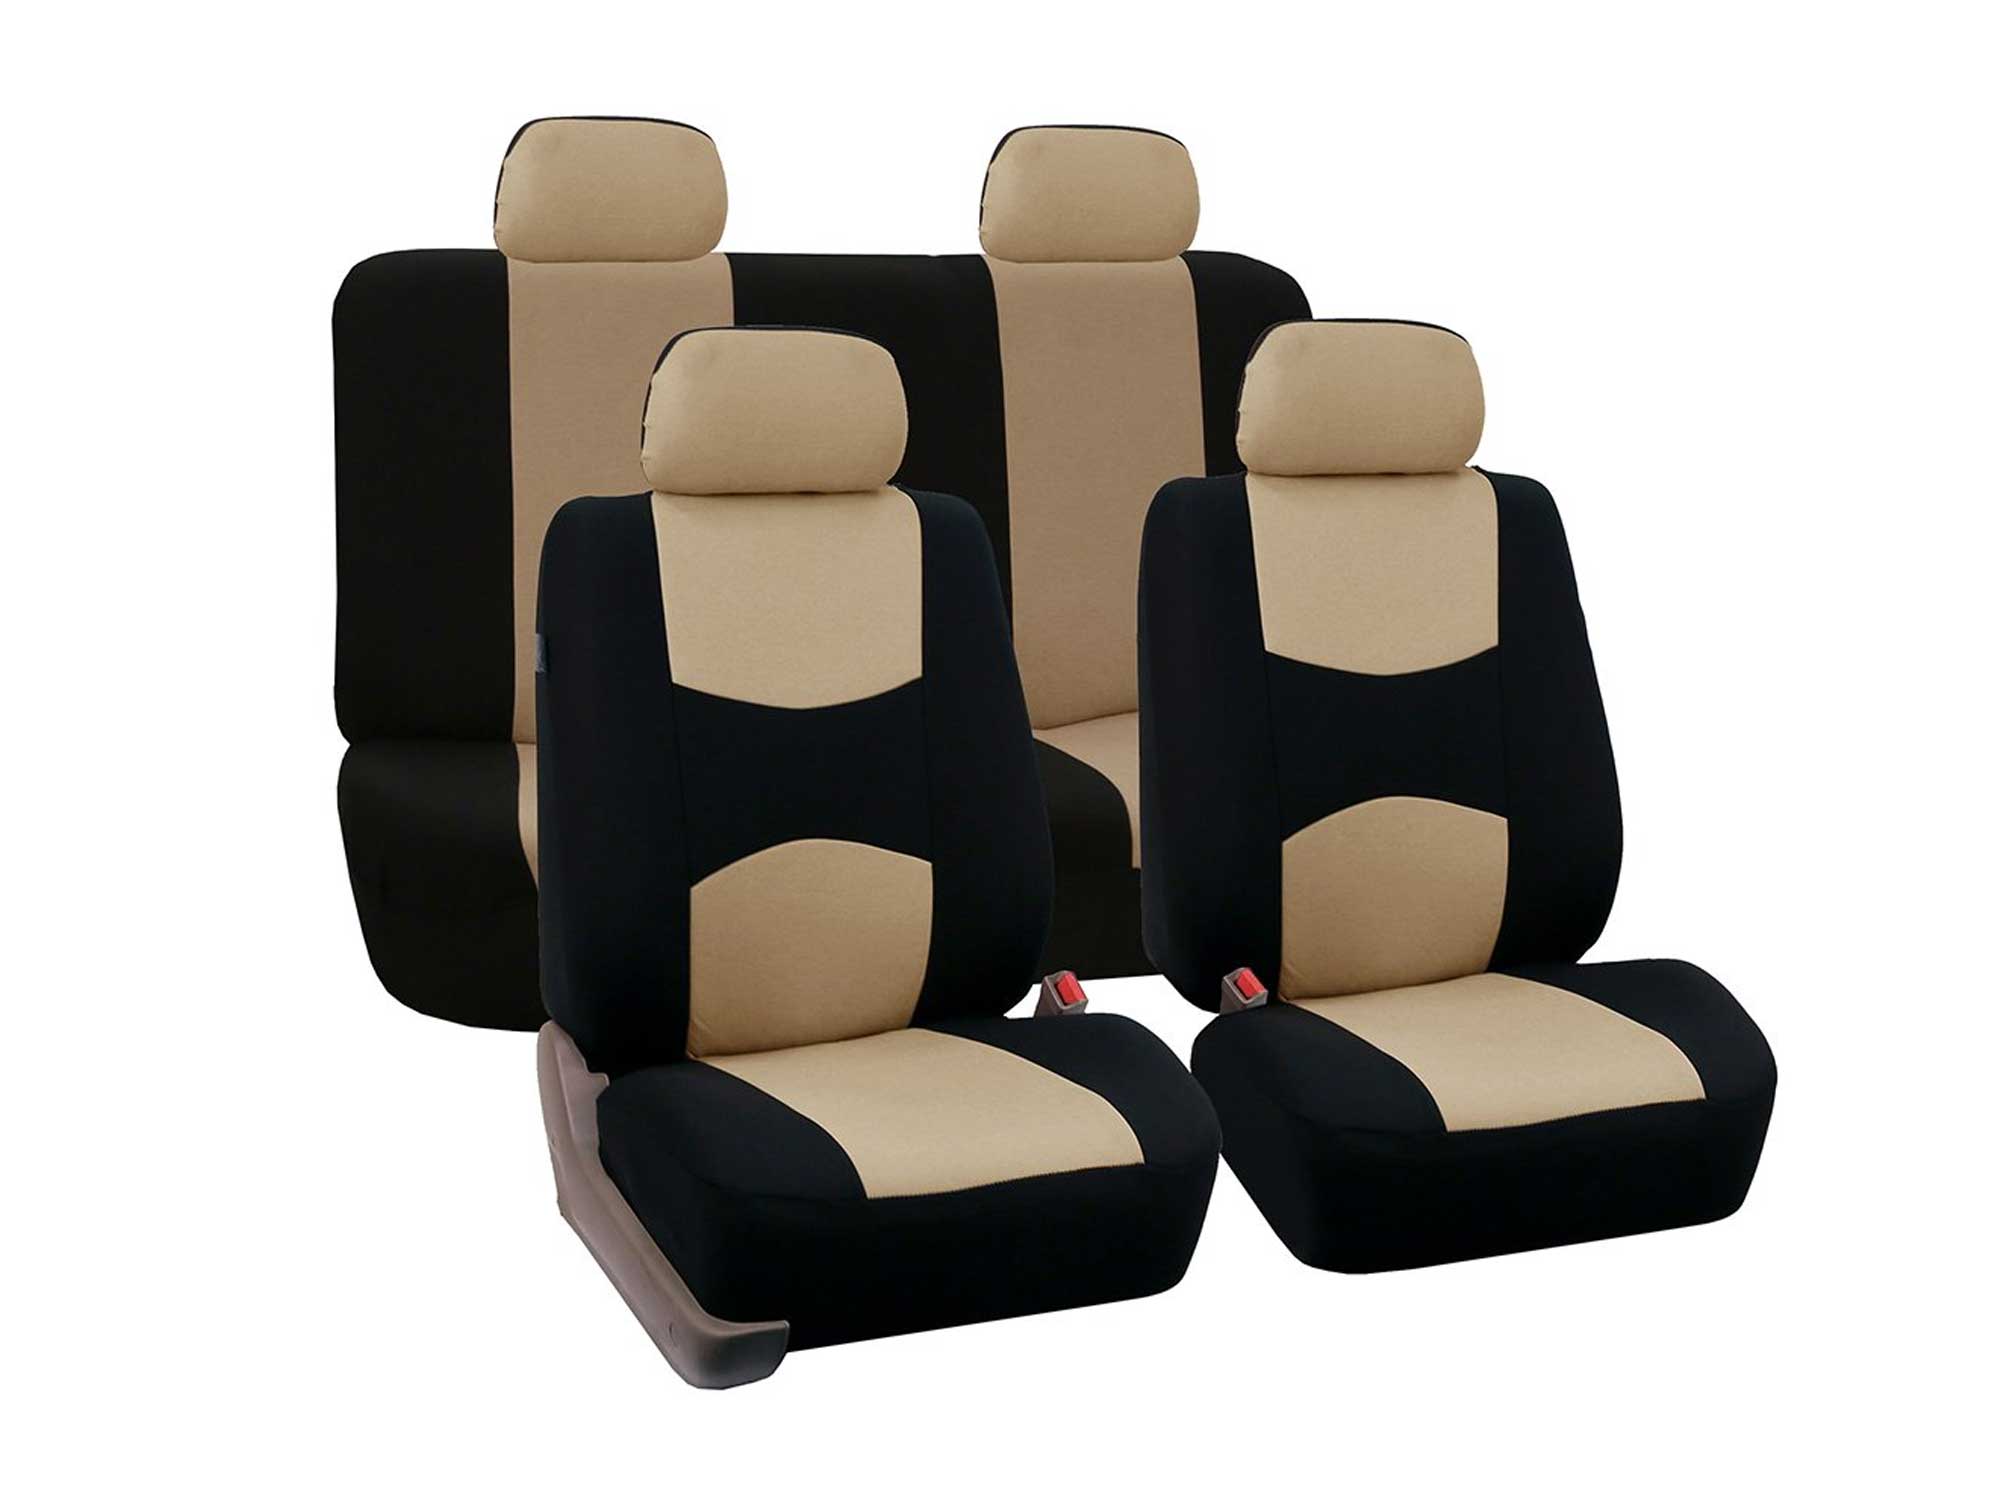 Beige and black seat covers